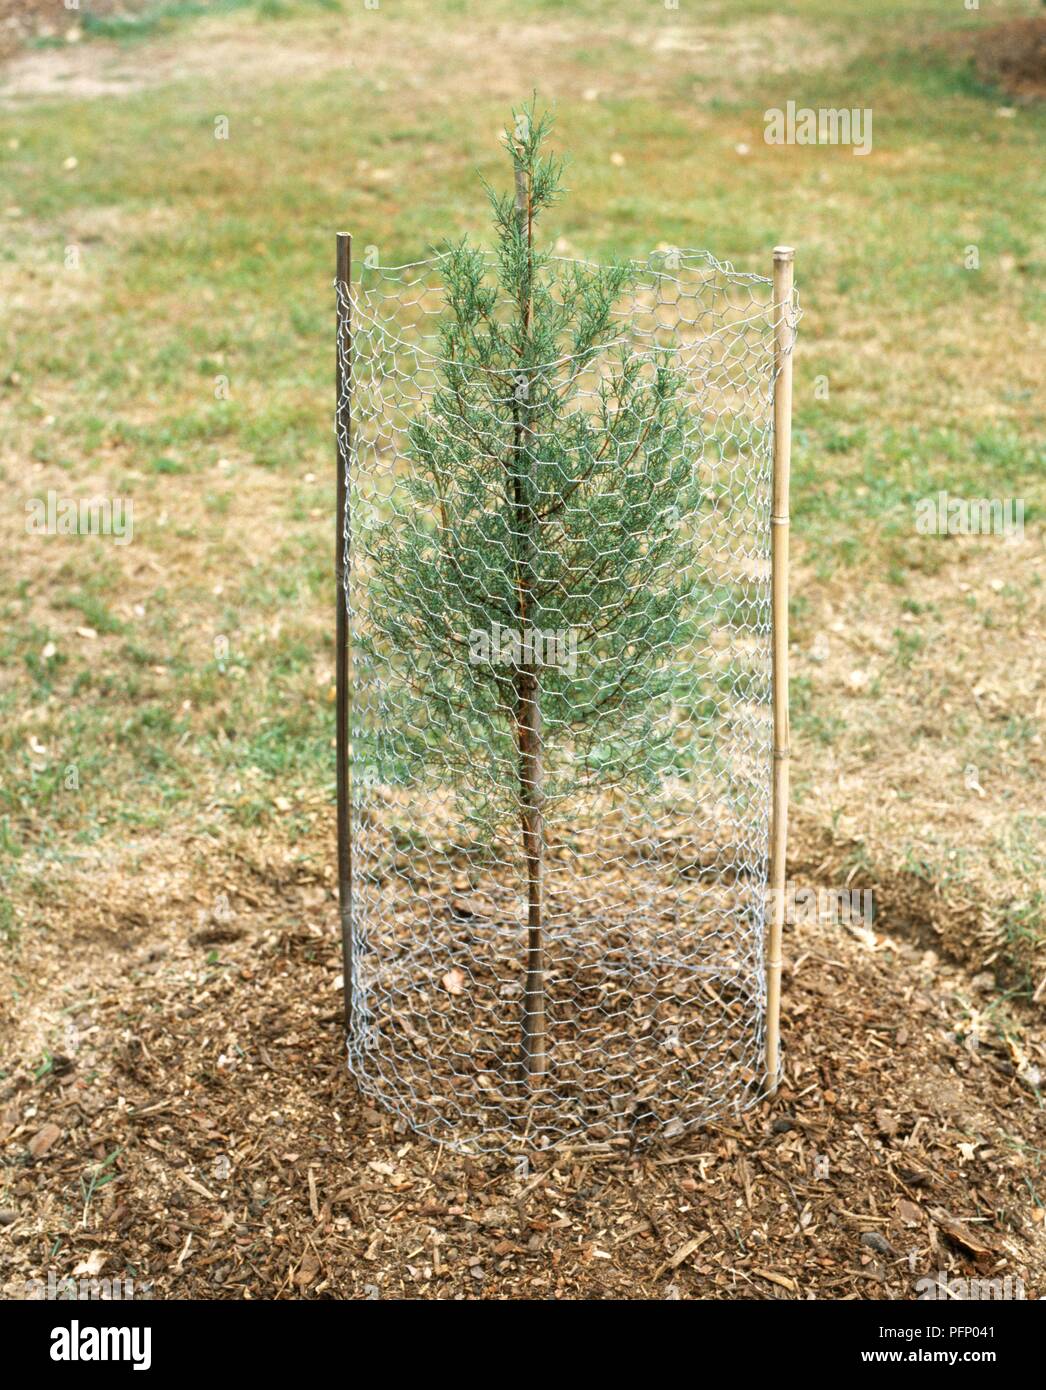 Wire mesh barrier protecting young Lawson's Cypress tree Stock Photo